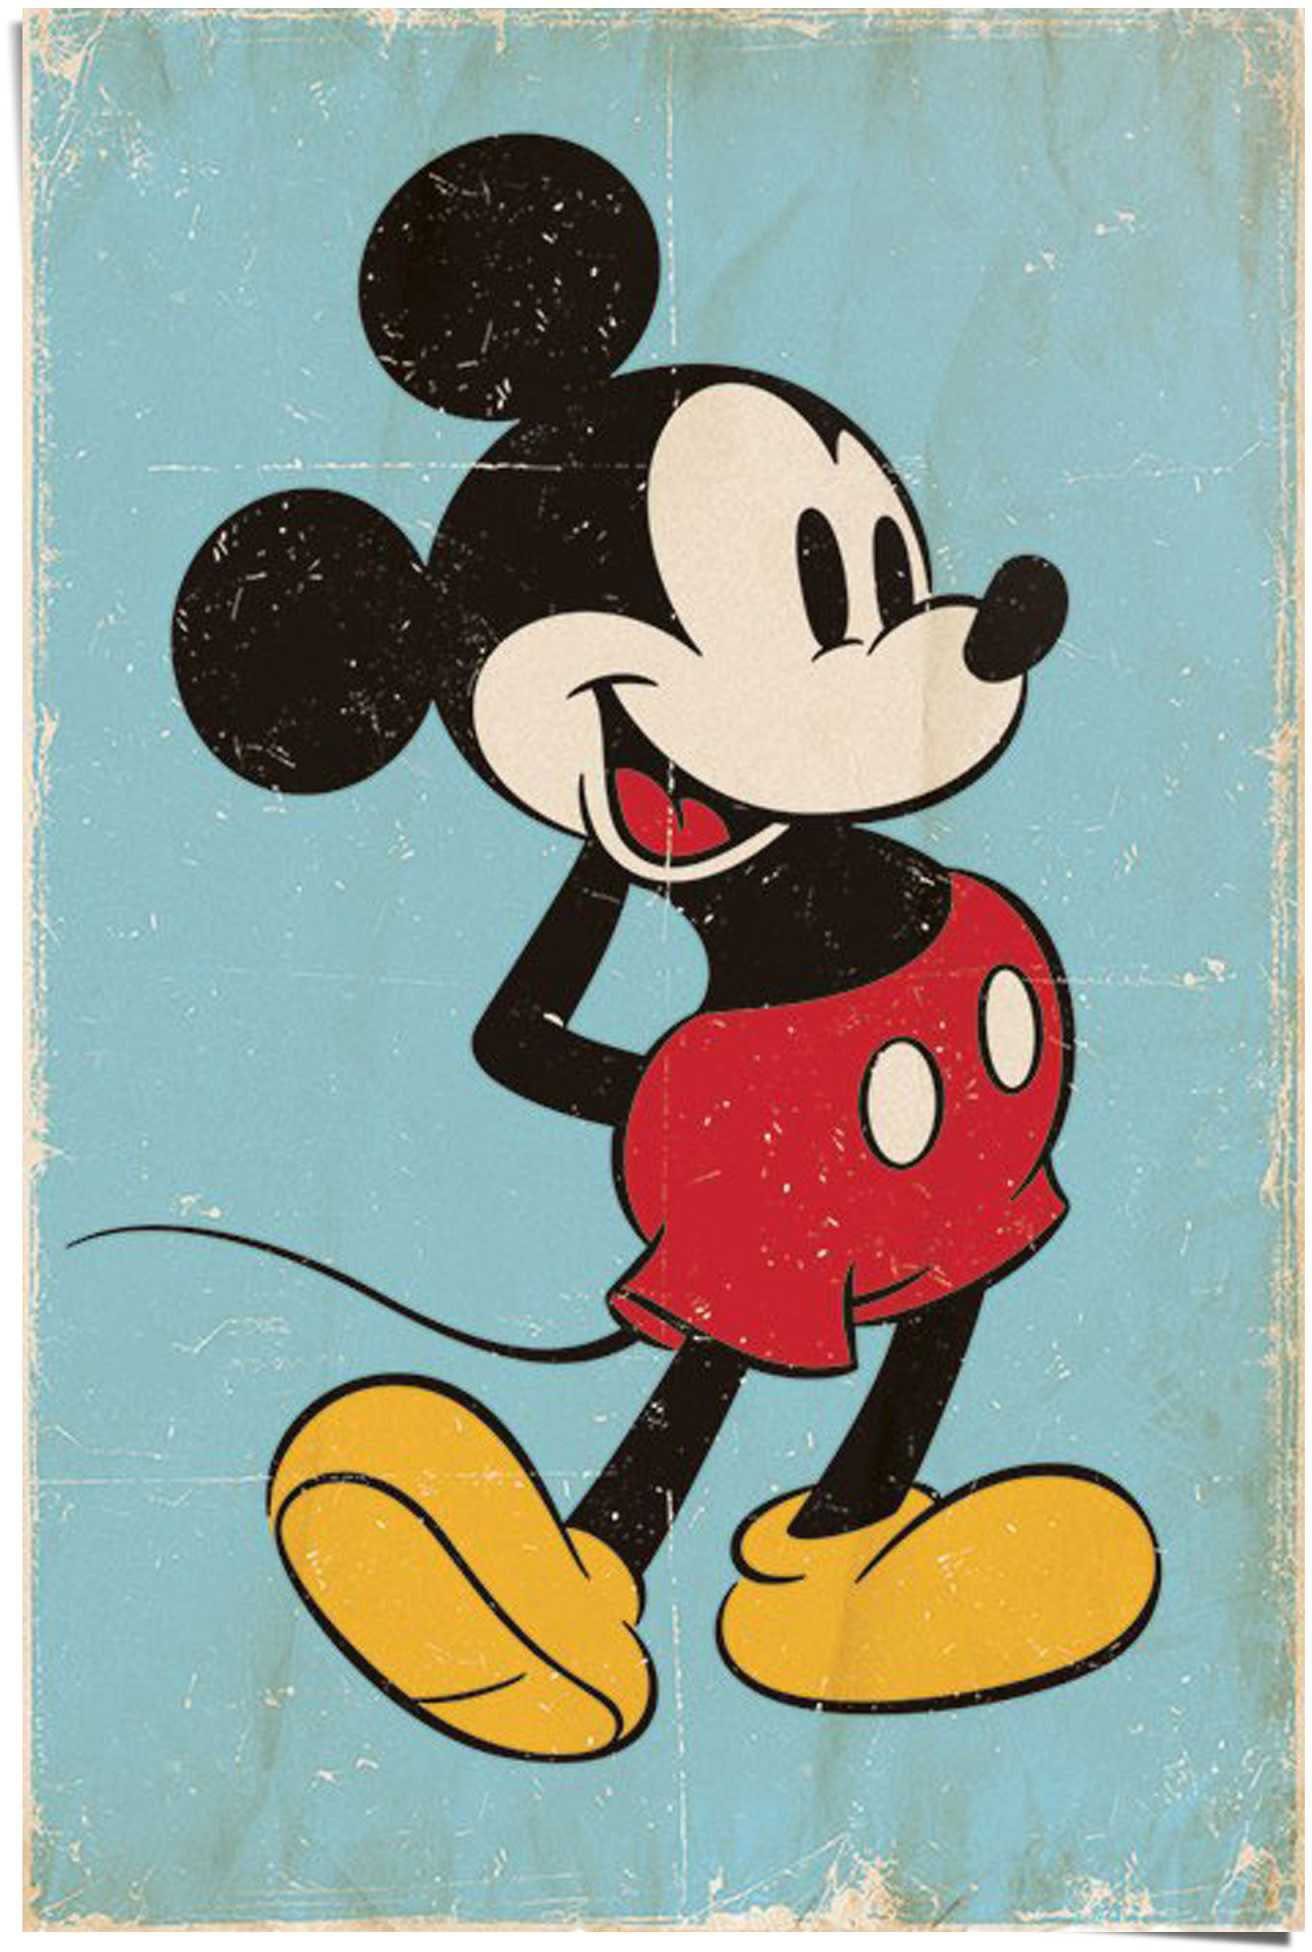 St) retro, Mickey Mouse Poster Reinders! (1